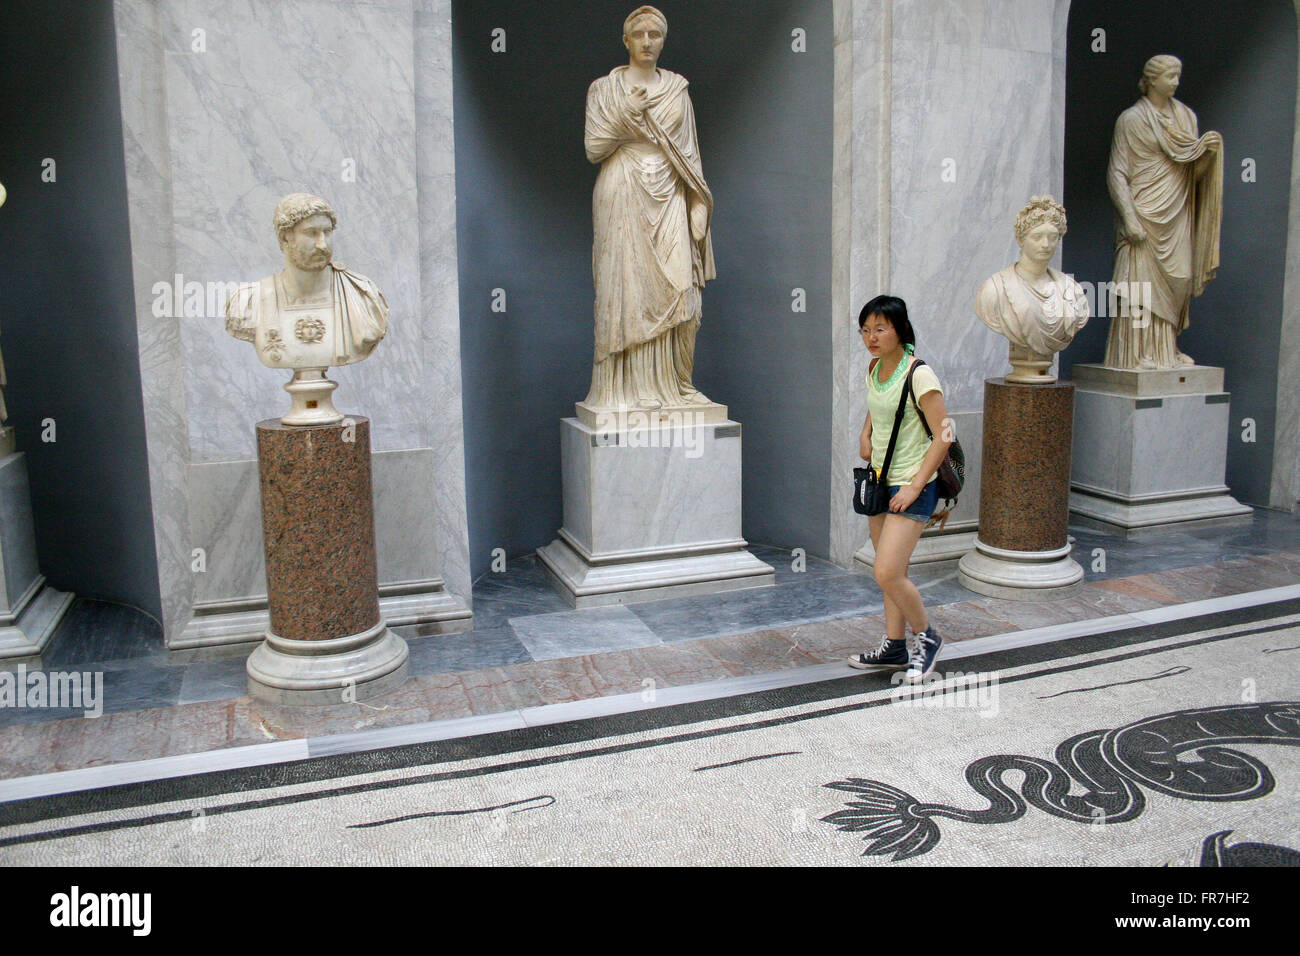 Chinese girl in museum looking at sculptures, Vatican Museum, Rome, Italy Stock Photo